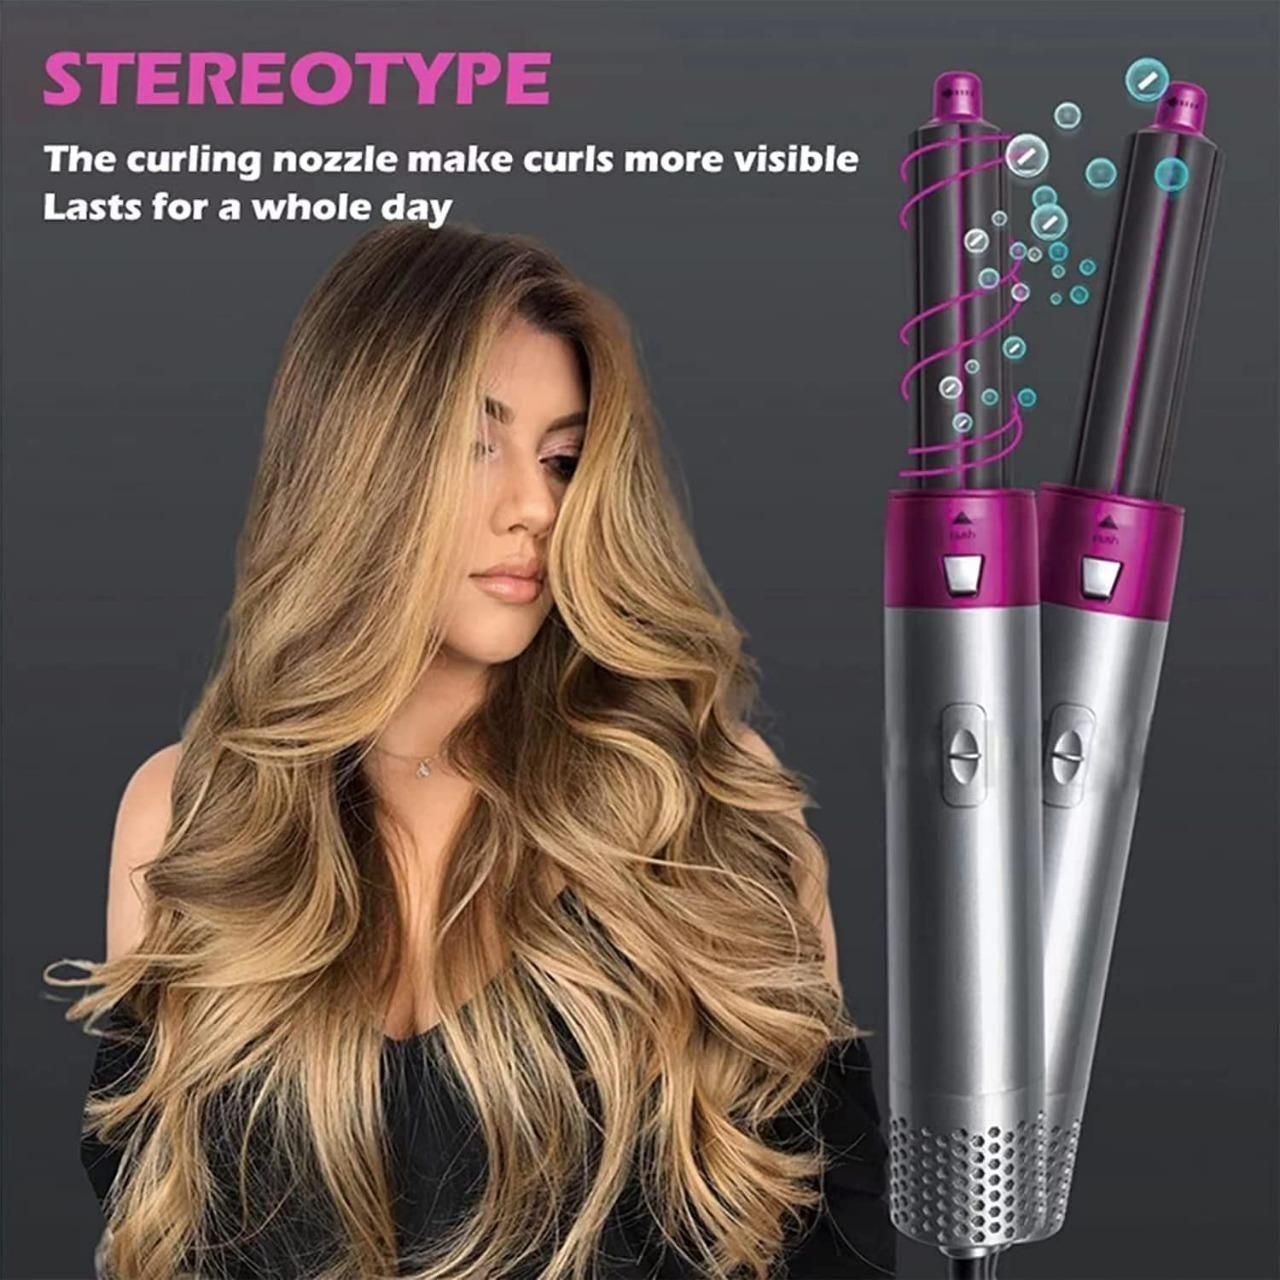 Professional Hair Styling Kit (5 in 1)